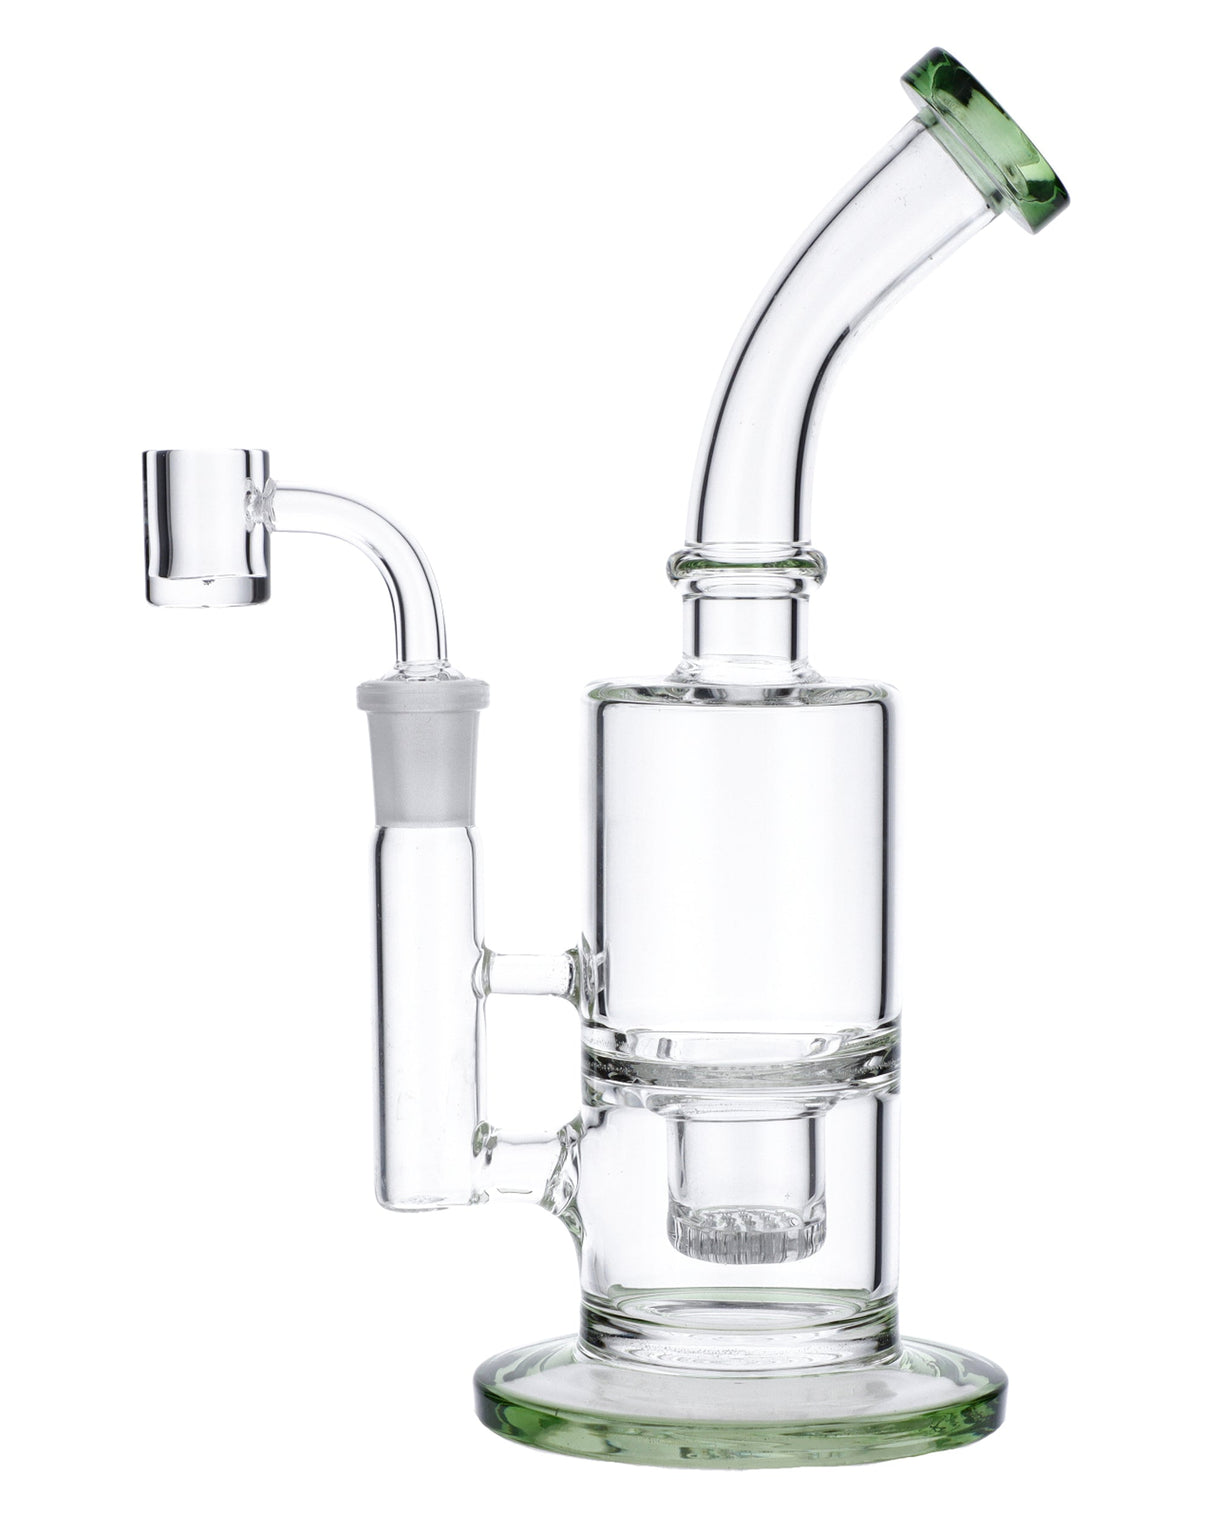 Valiant Distribution Green Glass Bubbler Rig, 8" with Banger Hanger Design, Front View on White Background